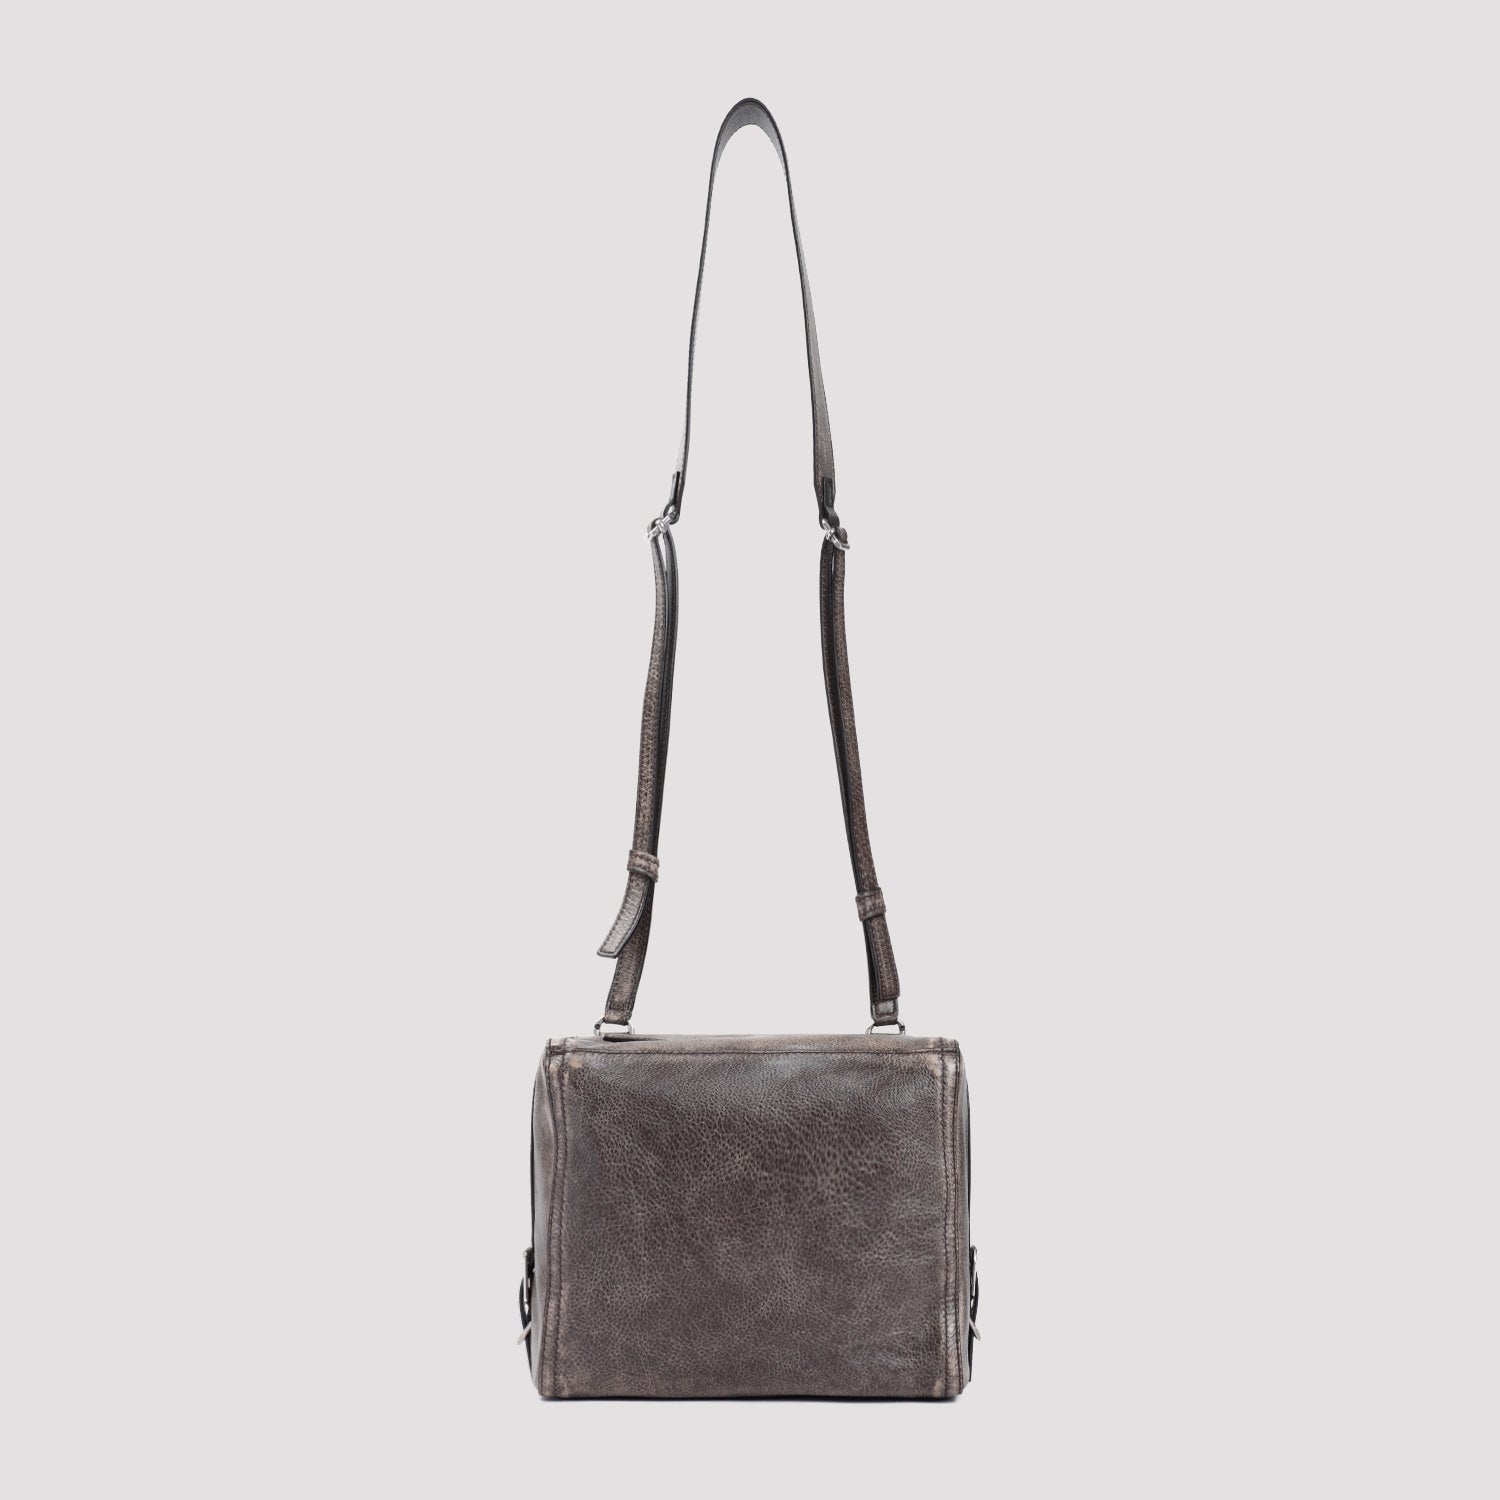 Givenchy Beige Brown Calf Leather Pandora Small Bag